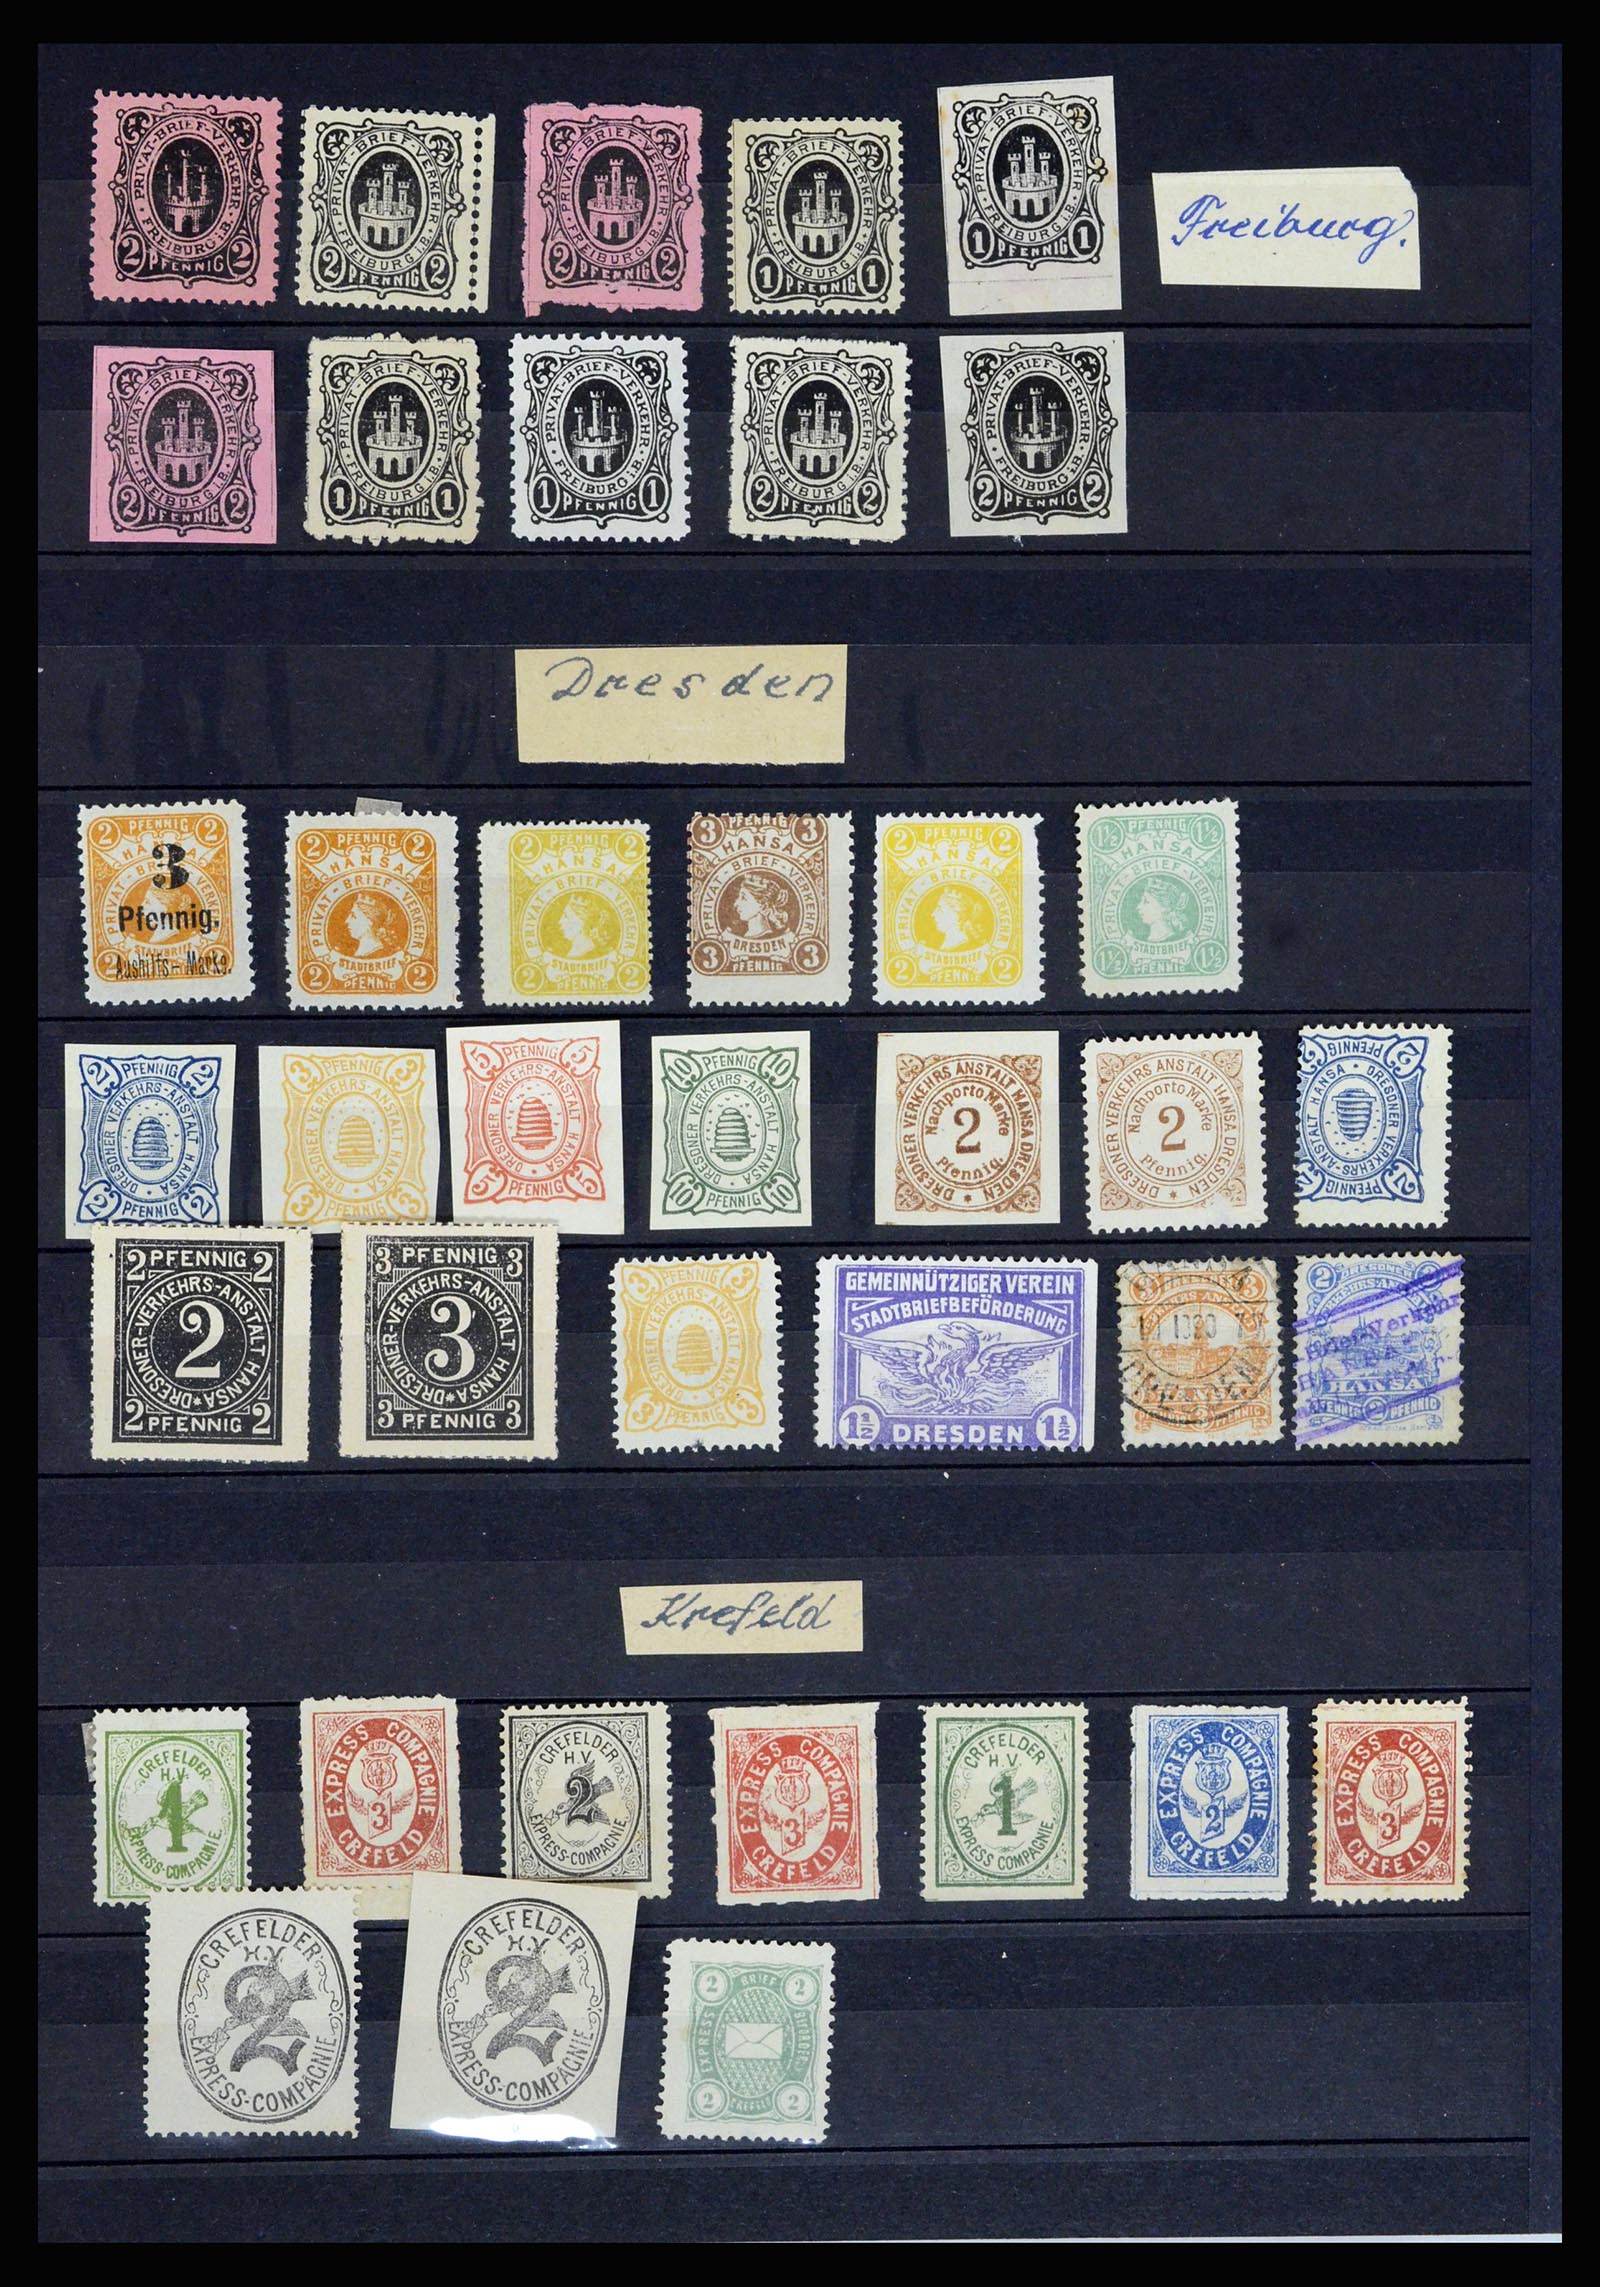 36932 020 - Stamp collection 36932 Germany local post 1884-1900.